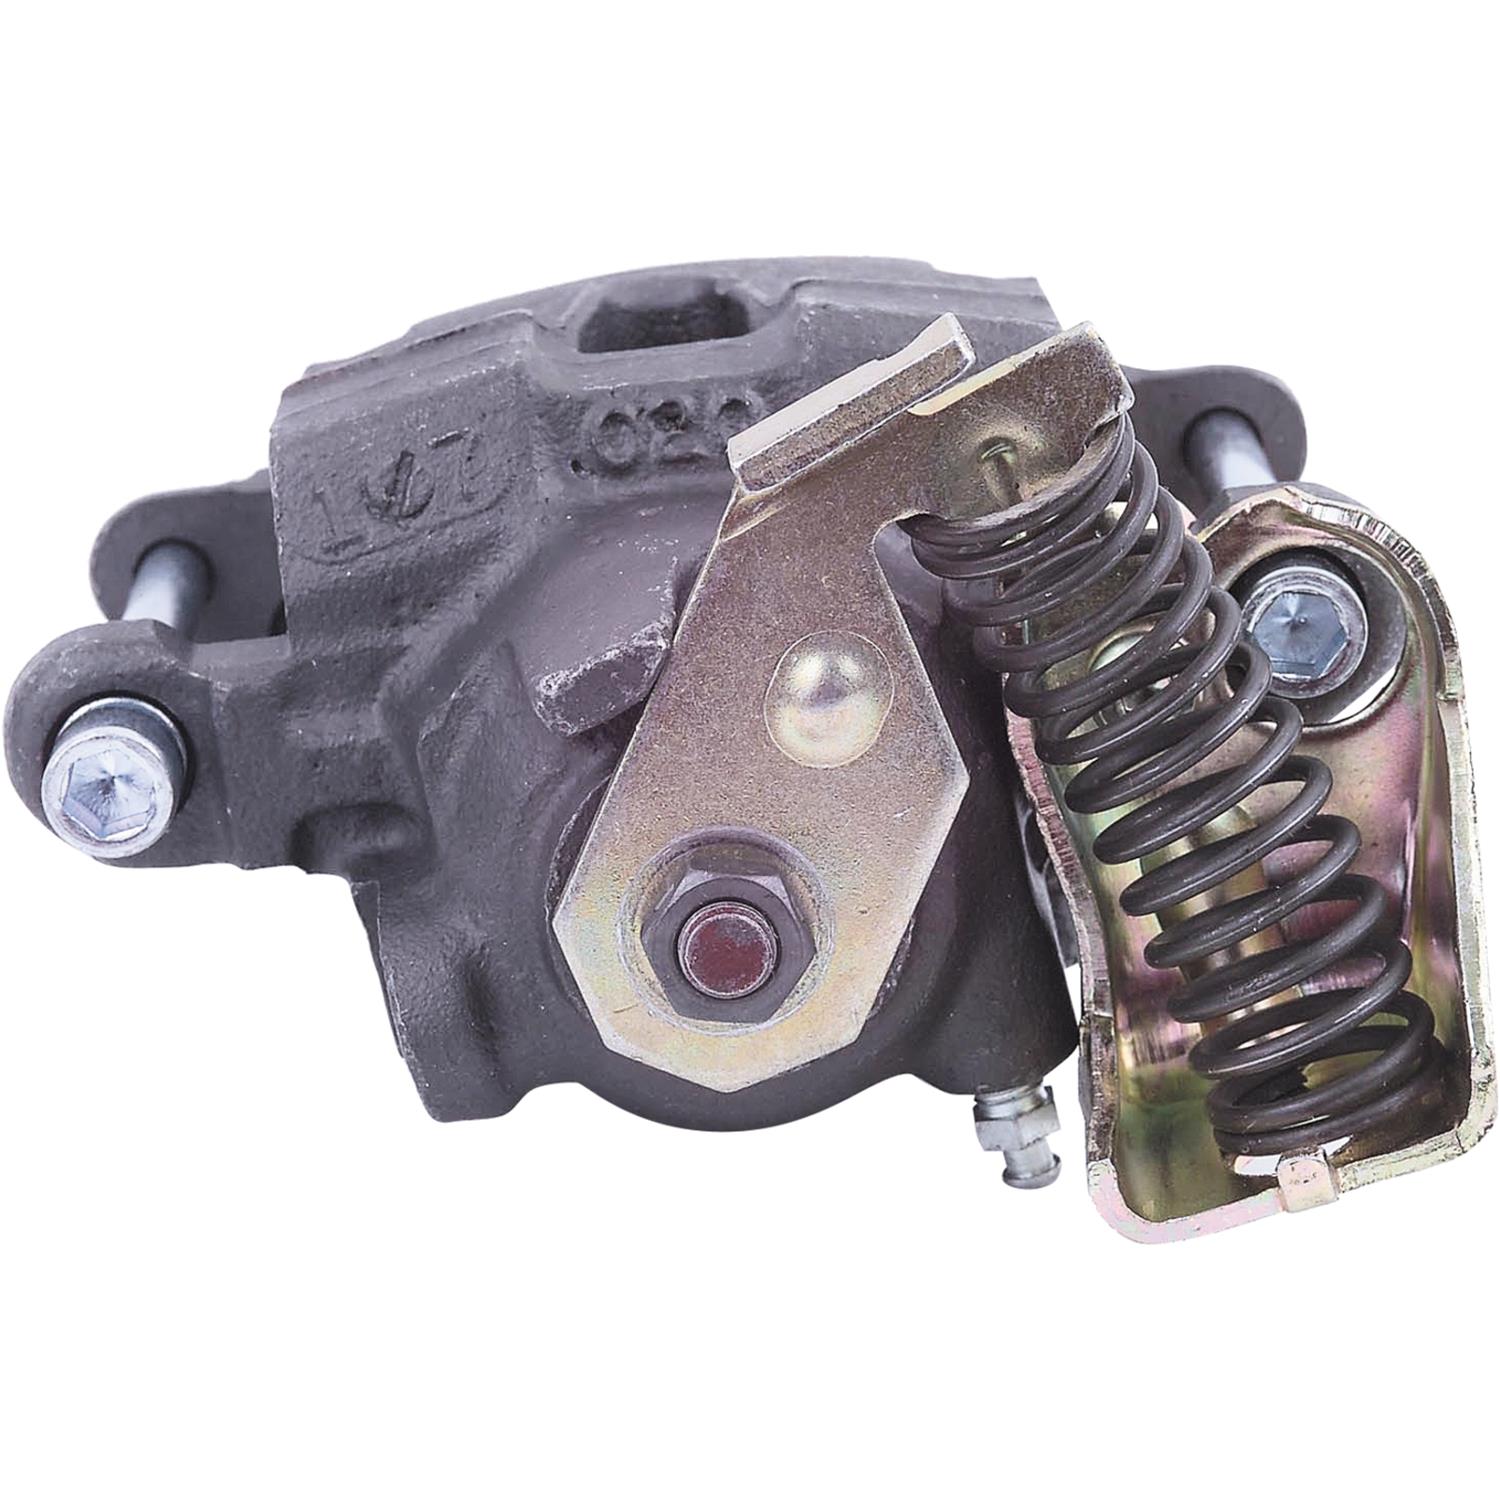 Unloaded Brake Caliper Cardone 19-1059 Remanufactured Import Friction Ready 